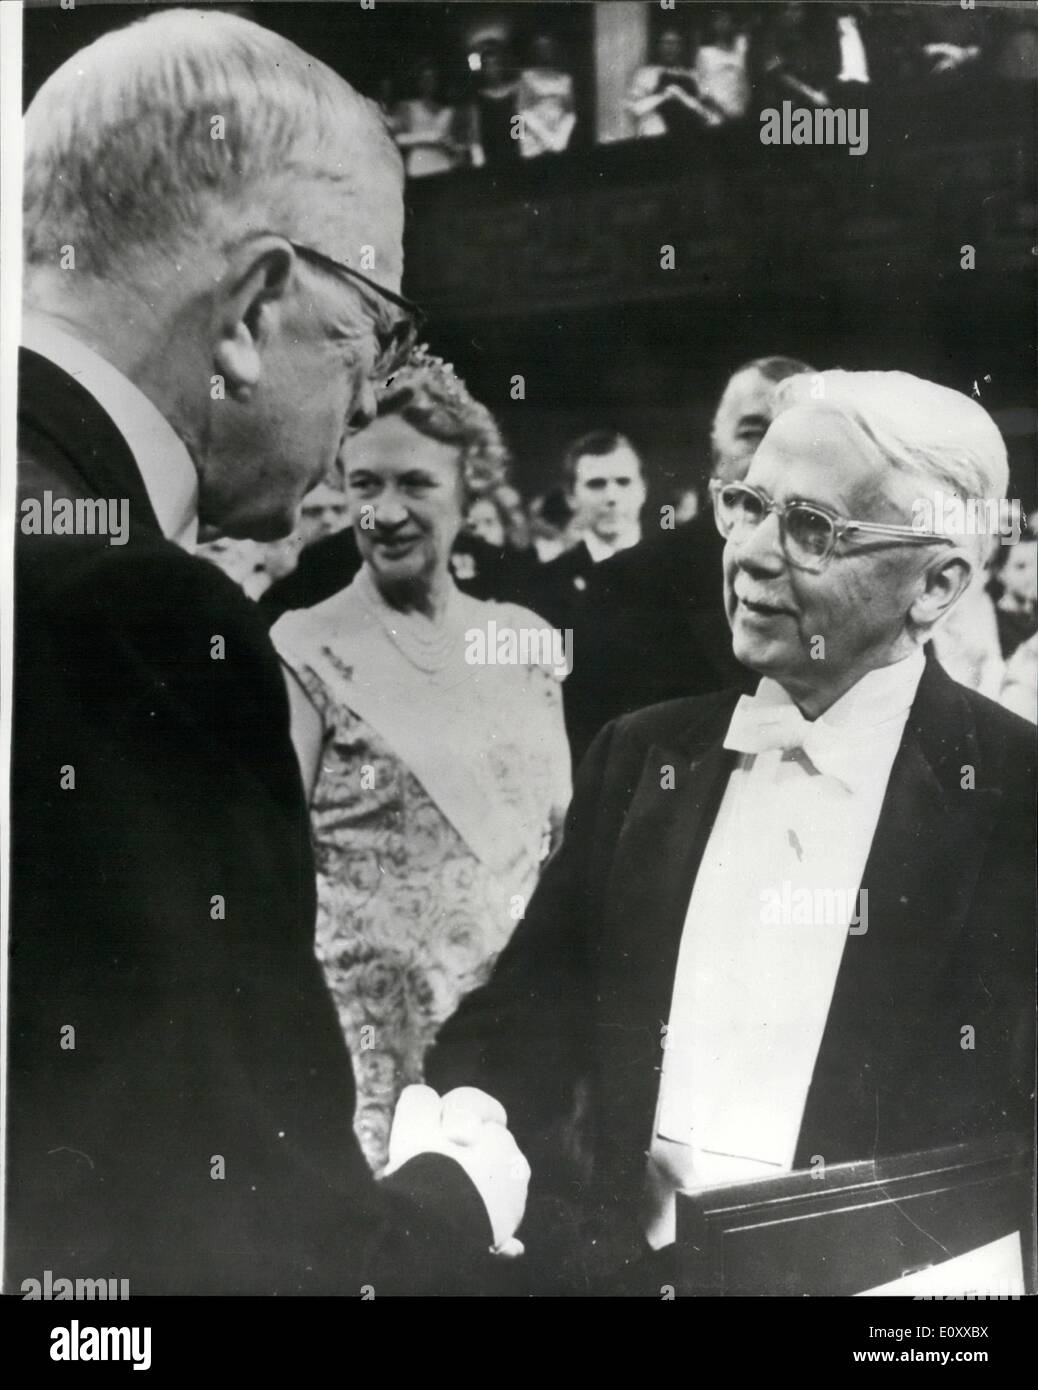 Dec. 12, 1967 - Nobel prize award in Stockholm.: AT a ceremony in the Concert Hall,Stockholm on Sunday (Dec 10), King Gustav Adolf of Sweden presented this year's Nobel prizes. The ceremony was held on the 71st. anniversary of the death of Alfred Nobel, the inventor and industrialist. Photo shows joint winner of the prize for medicine, Prof. Haldan K. Hartline (U.S.A.), receiving the a war from King Gustav Adolf of Sweden. Stock Photo